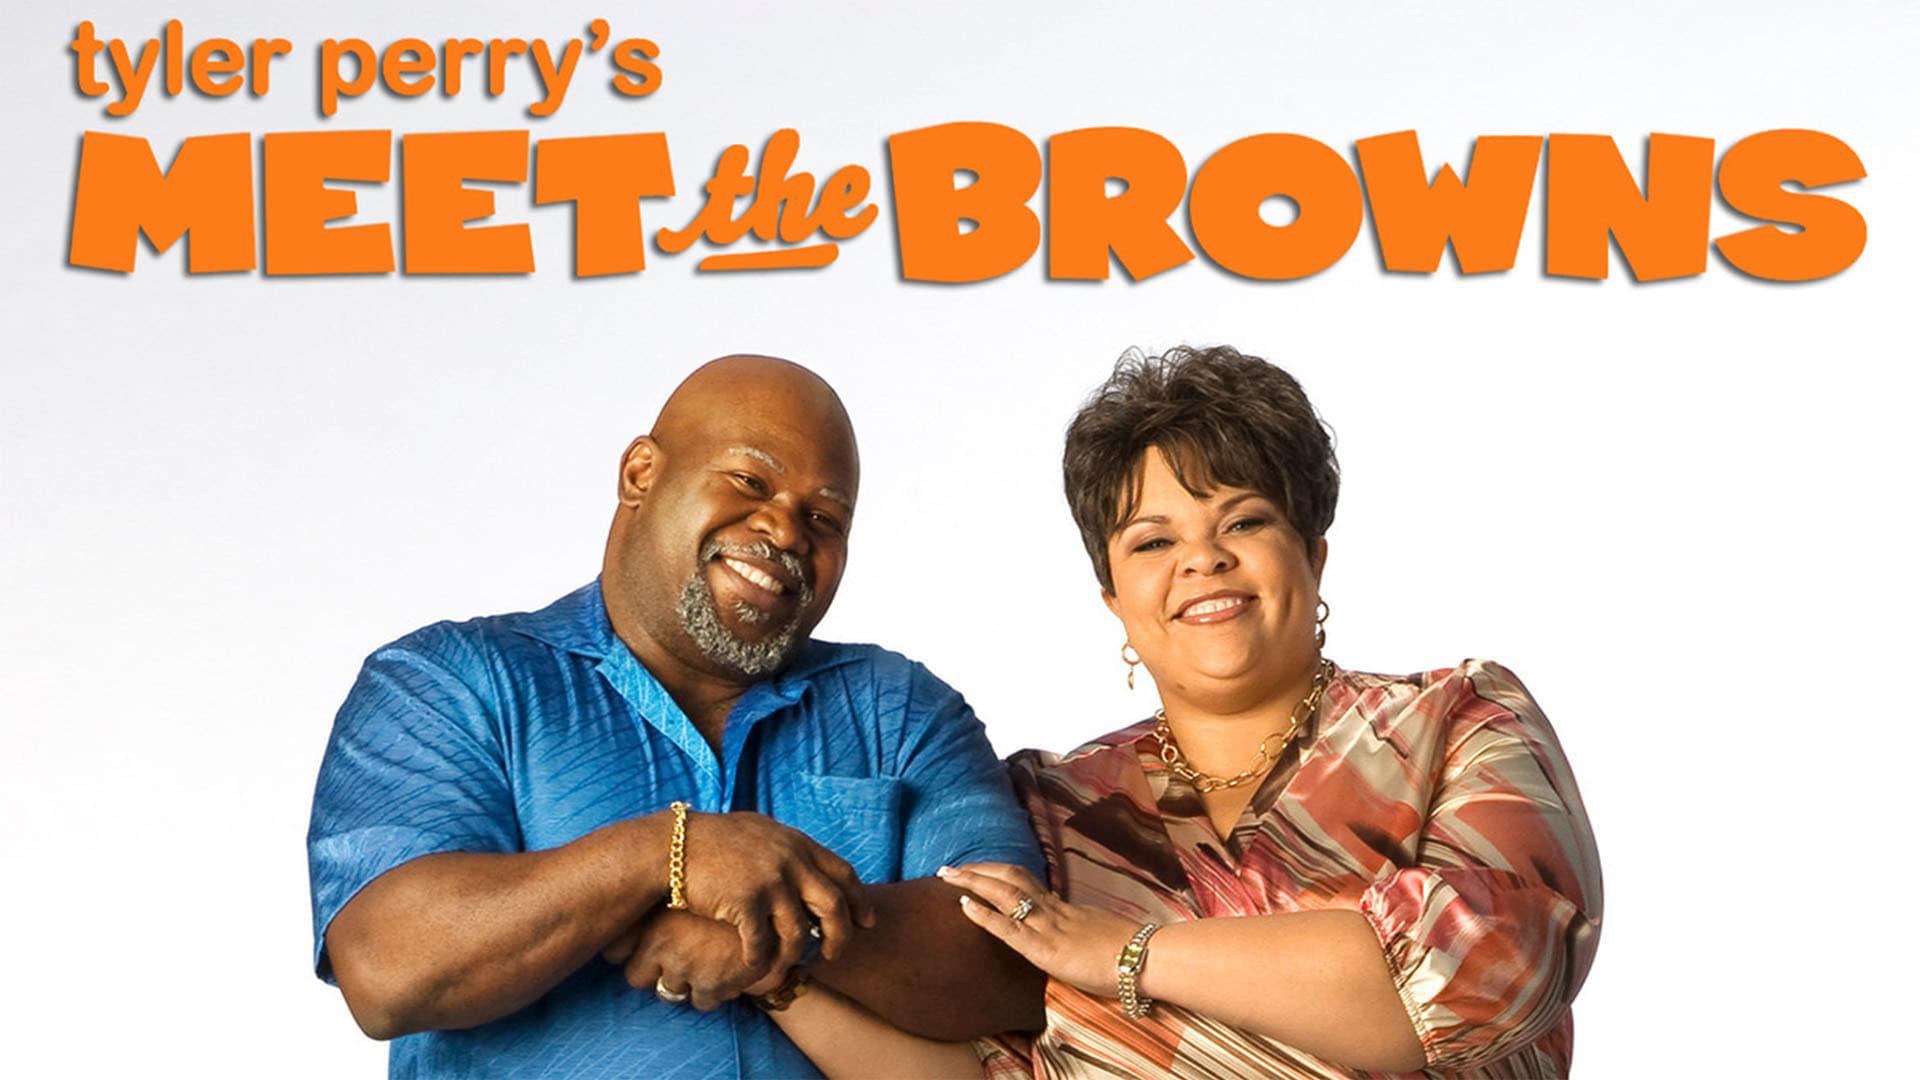 Meet the Browns backdrop